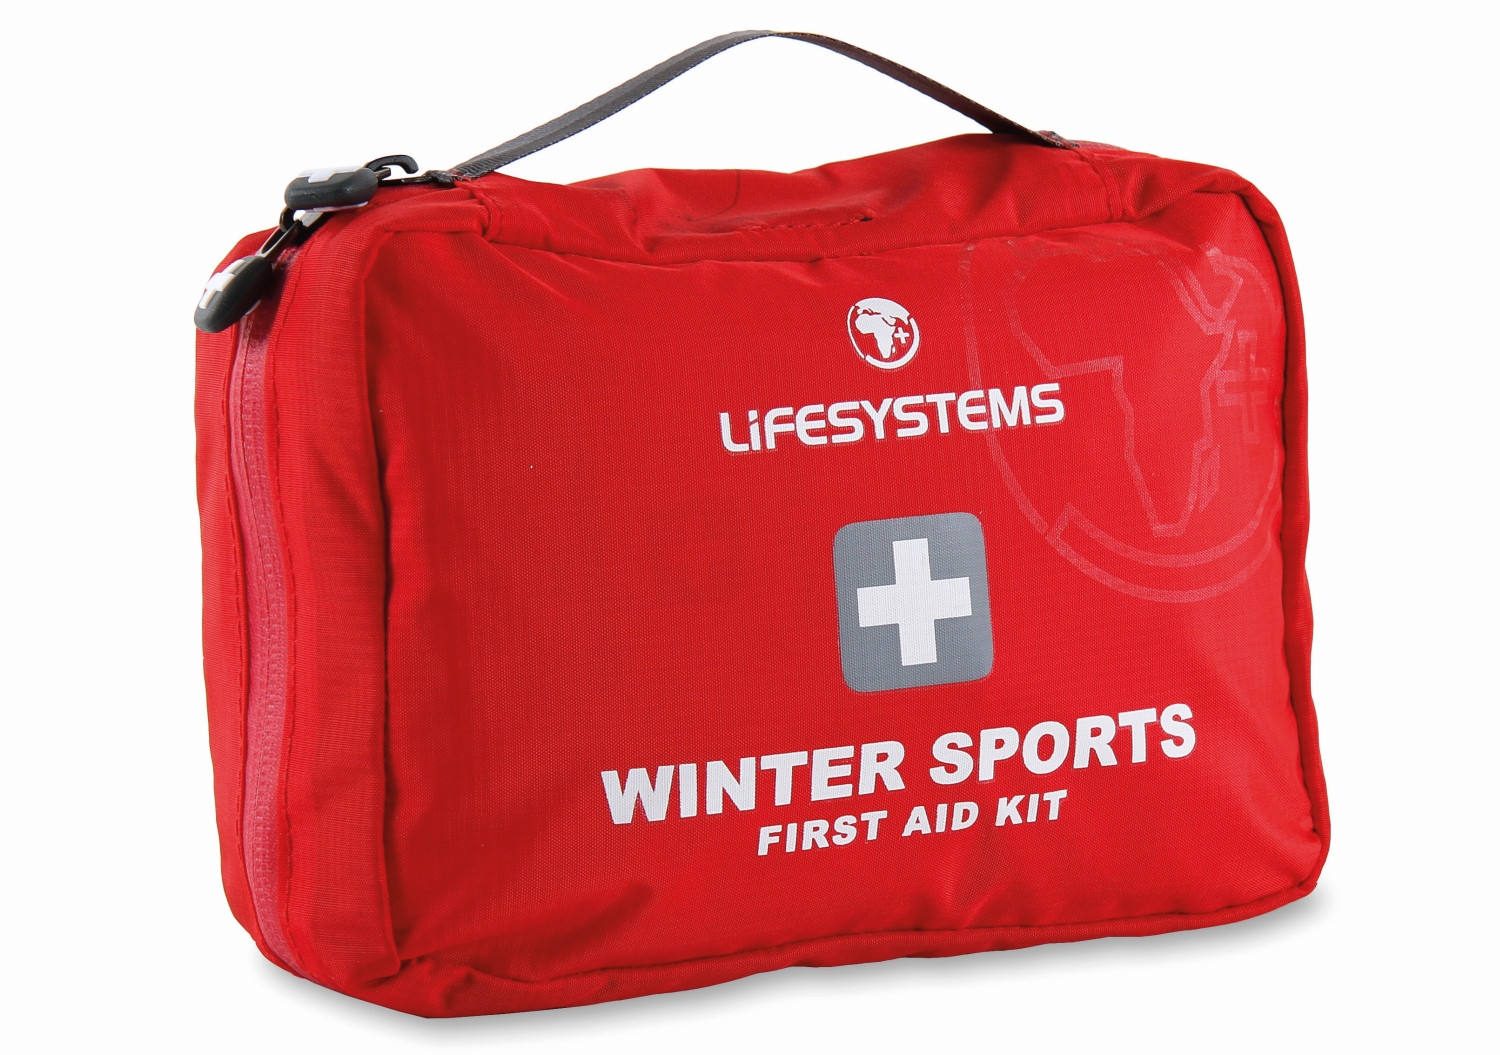 lifesystems winter sports first aid kit